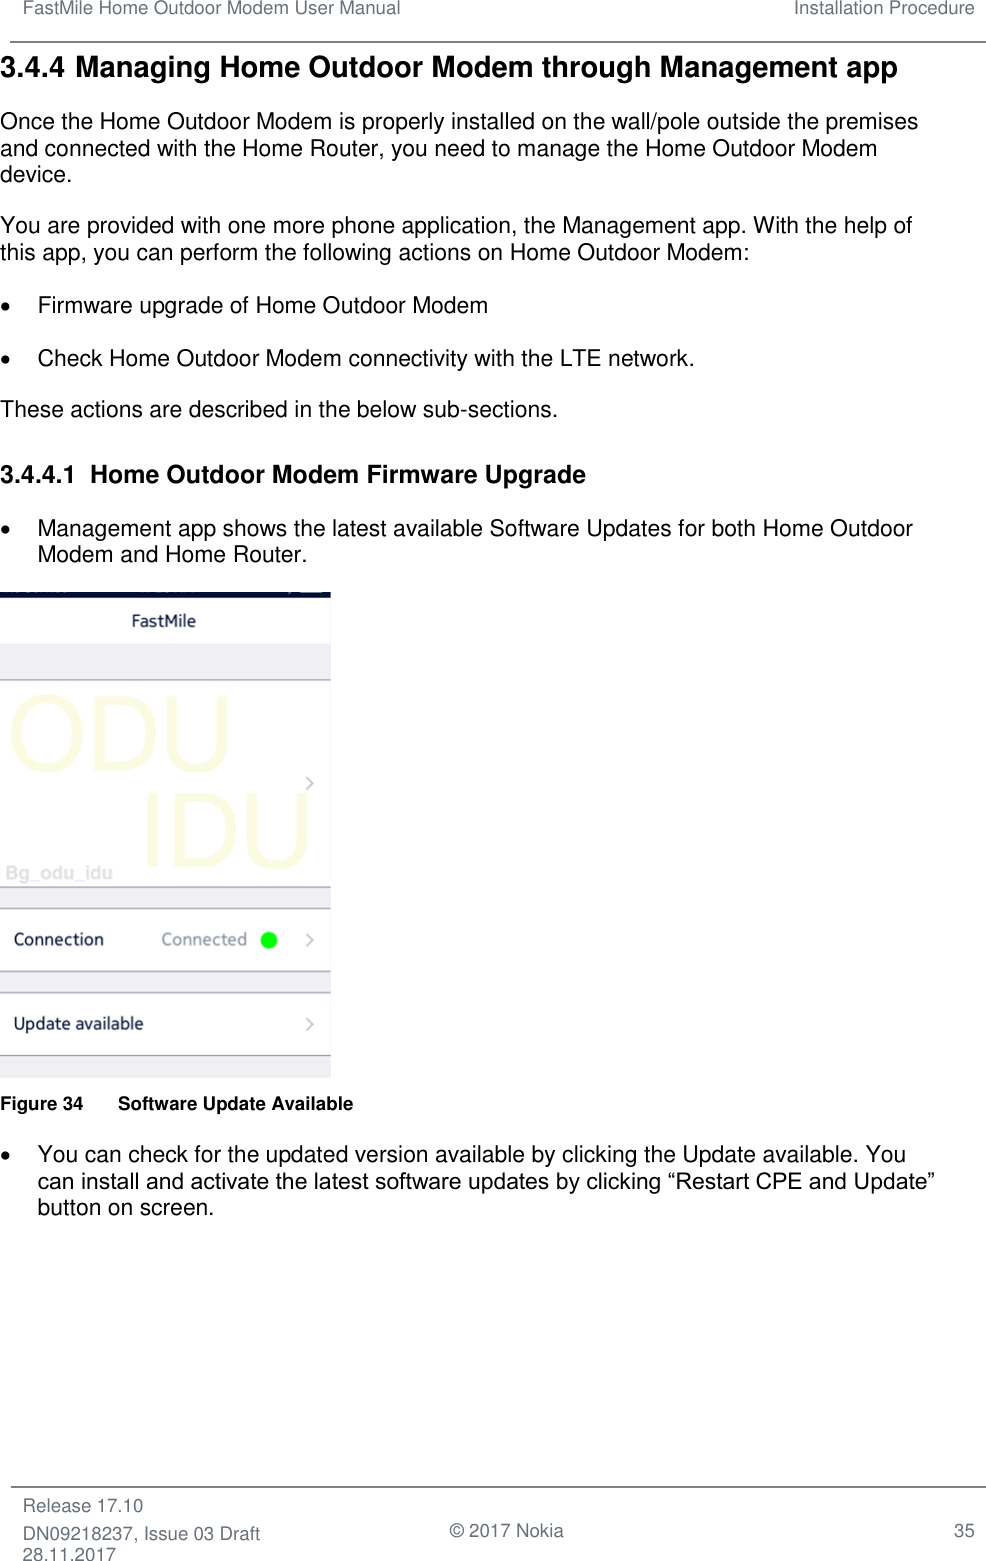 FastMile Home Outdoor Modem User Manual Installation Procedure  Release 17.10 DN09218237, Issue 03 Draft 28.11.2017                                © 2017 Nokia 35  3.4.4 Managing Home Outdoor Modem through Management app Once the Home Outdoor Modem is properly installed on the wall/pole outside the premises and connected with the Home Router, you need to manage the Home Outdoor Modem device. You are provided with one more phone application, the Management app. With the help of this app, you can perform the following actions on Home Outdoor Modem: •  Firmware upgrade of Home Outdoor Modem •  Check Home Outdoor Modem connectivity with the LTE network. These actions are described in the below sub-sections. 3.4.4.1  Home Outdoor Modem Firmware Upgrade •  Management app shows the latest available Software Updates for both Home Outdoor Modem and Home Router.  Figure 34  Software Update Available •  You can check for the updated version available by clicking the Update available. You can install and activate the latest software updates by clicking “Restart CPE and Update” button on screen. 